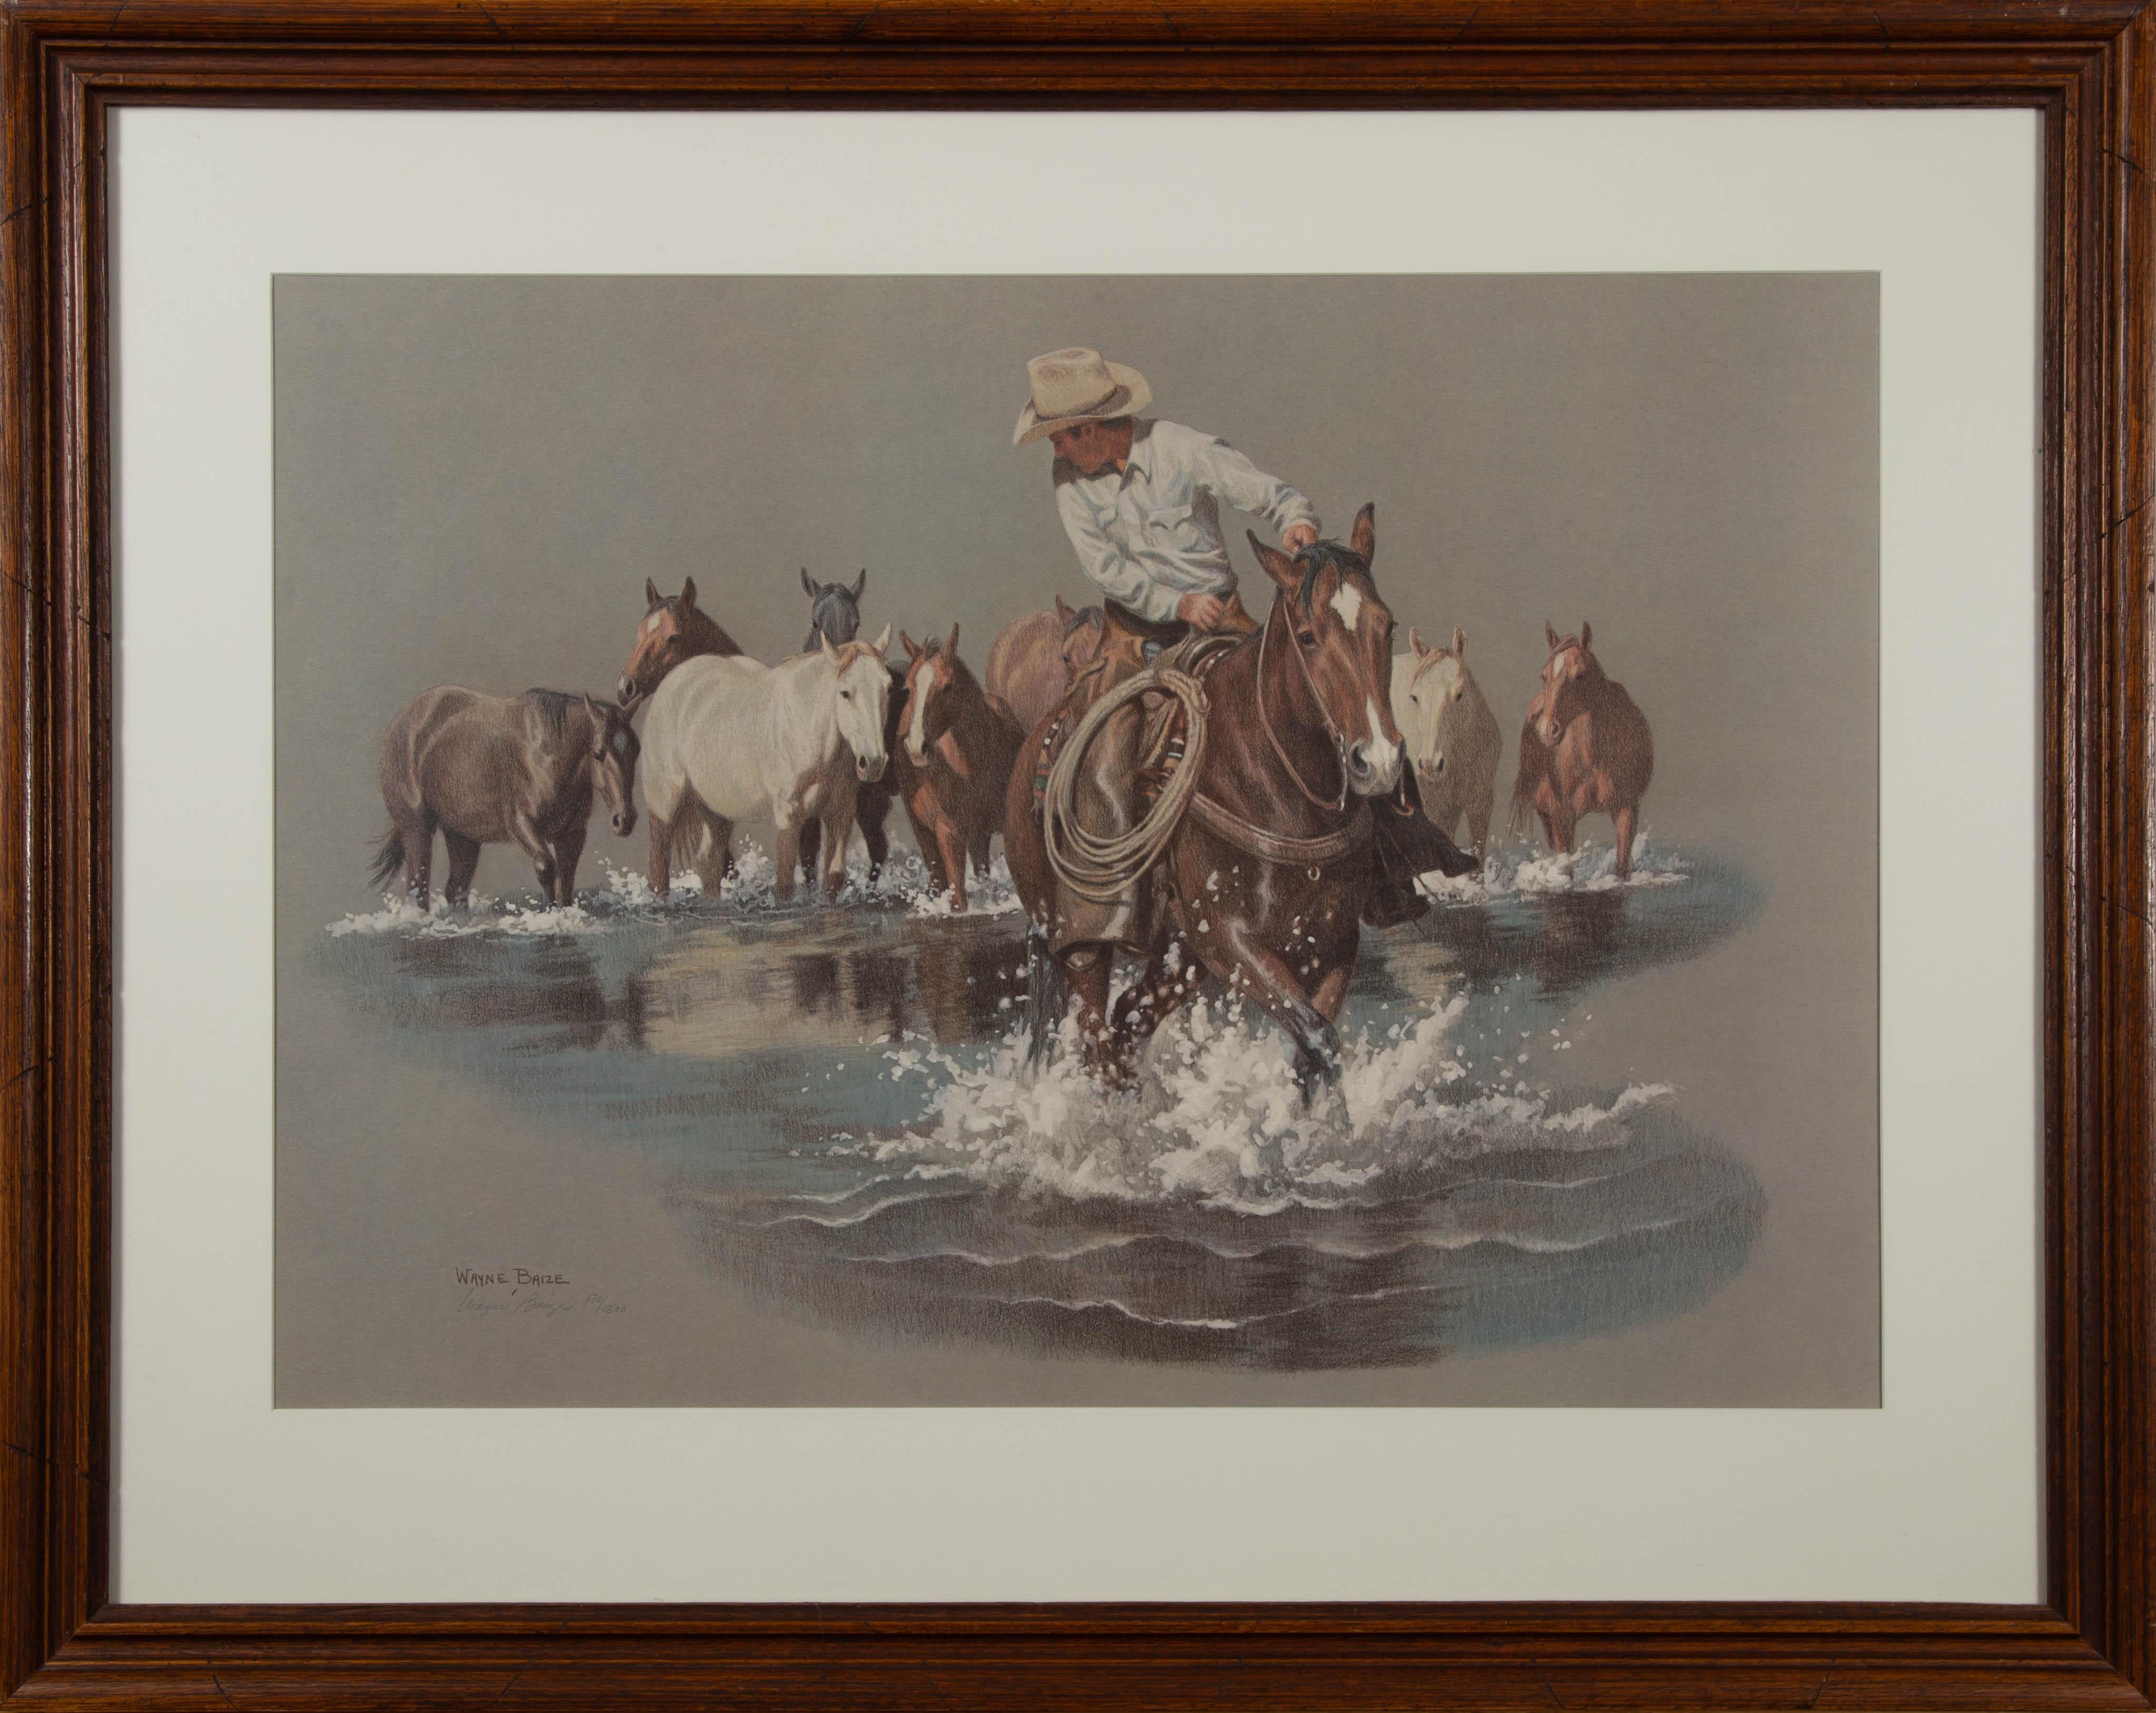 Wayne Baize Figurative Print - Limpia Creek Crossing, lithograph, signed and numberd, Cowboy Western Art